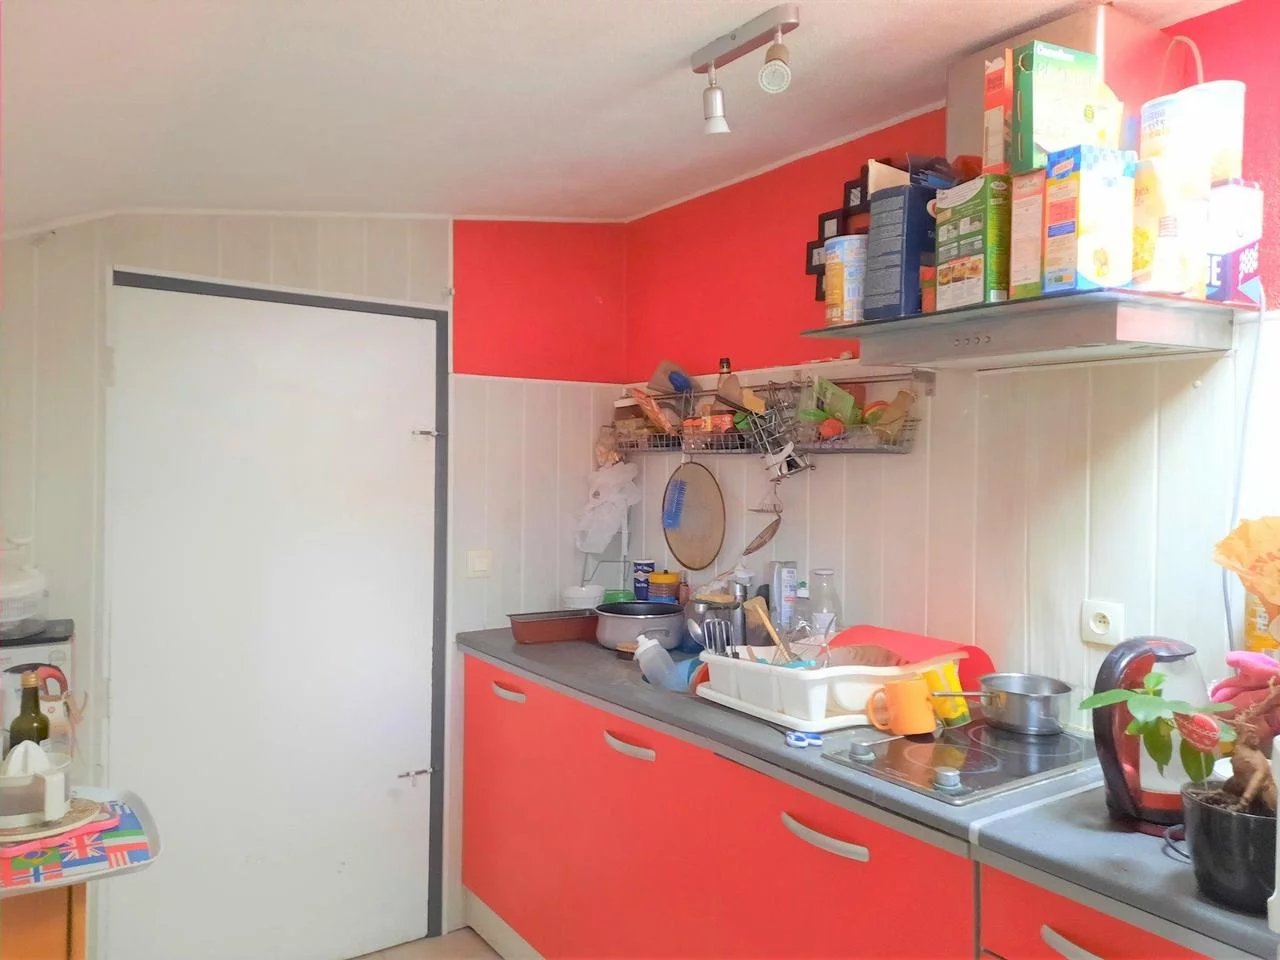 Appartement  1 Rooms 31.07m2  for sale   124 000 €